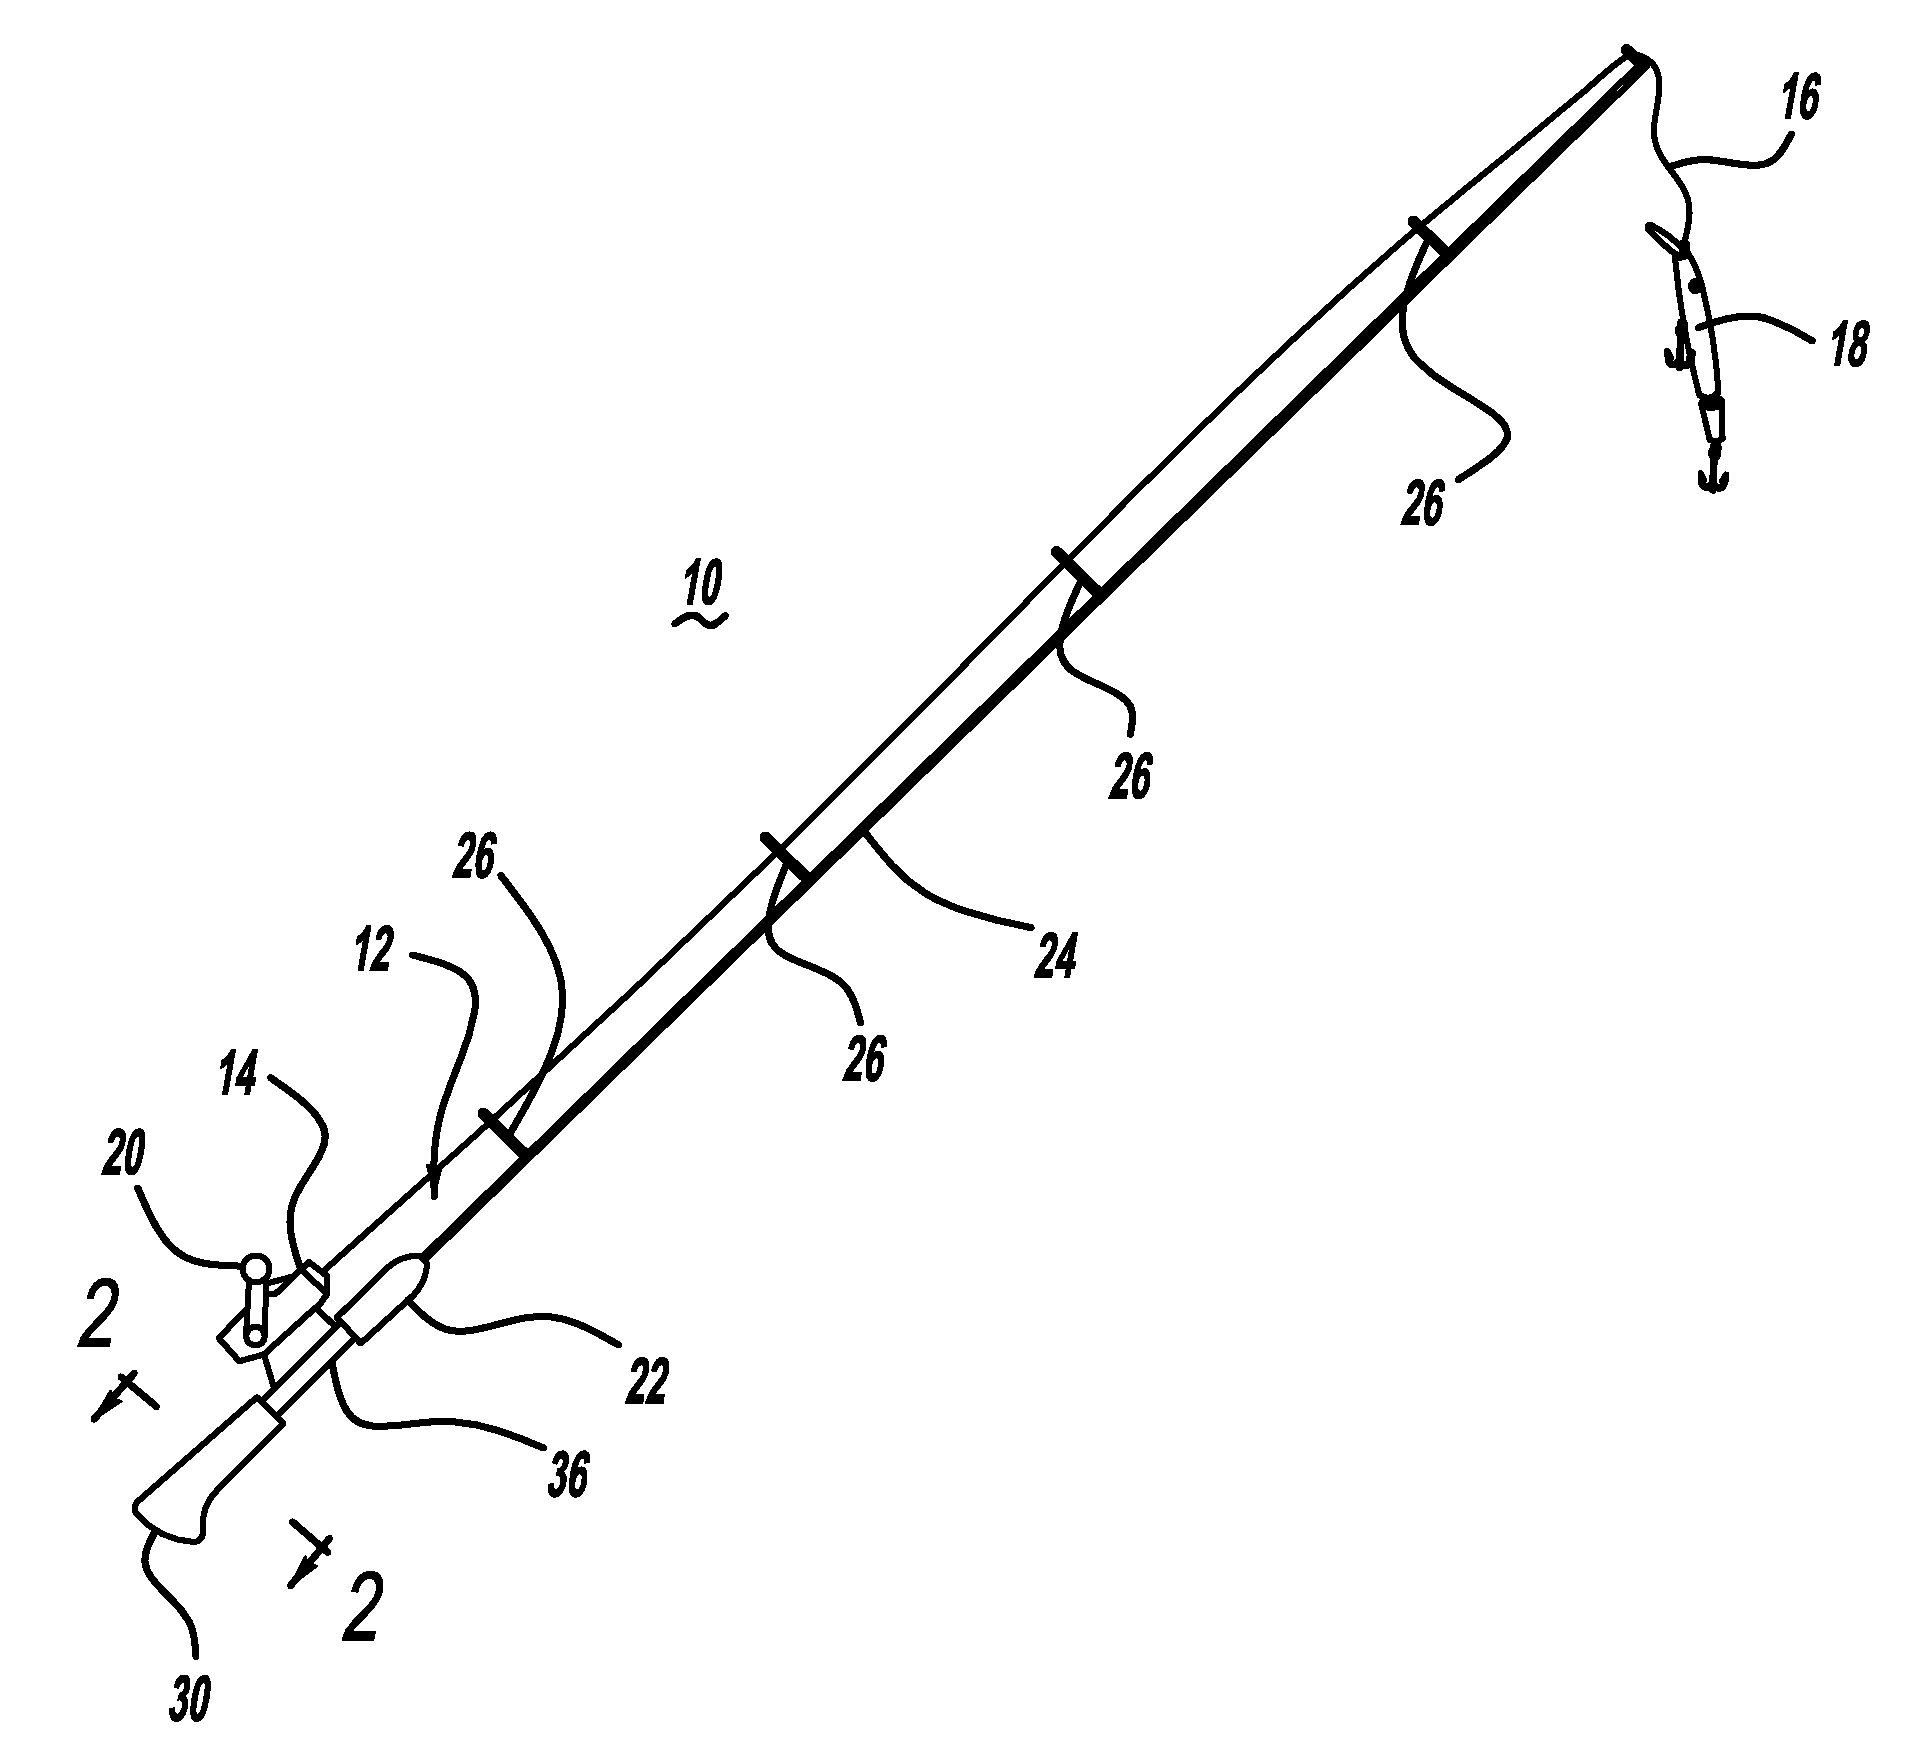 Computerized fishing apparatus and method of using same